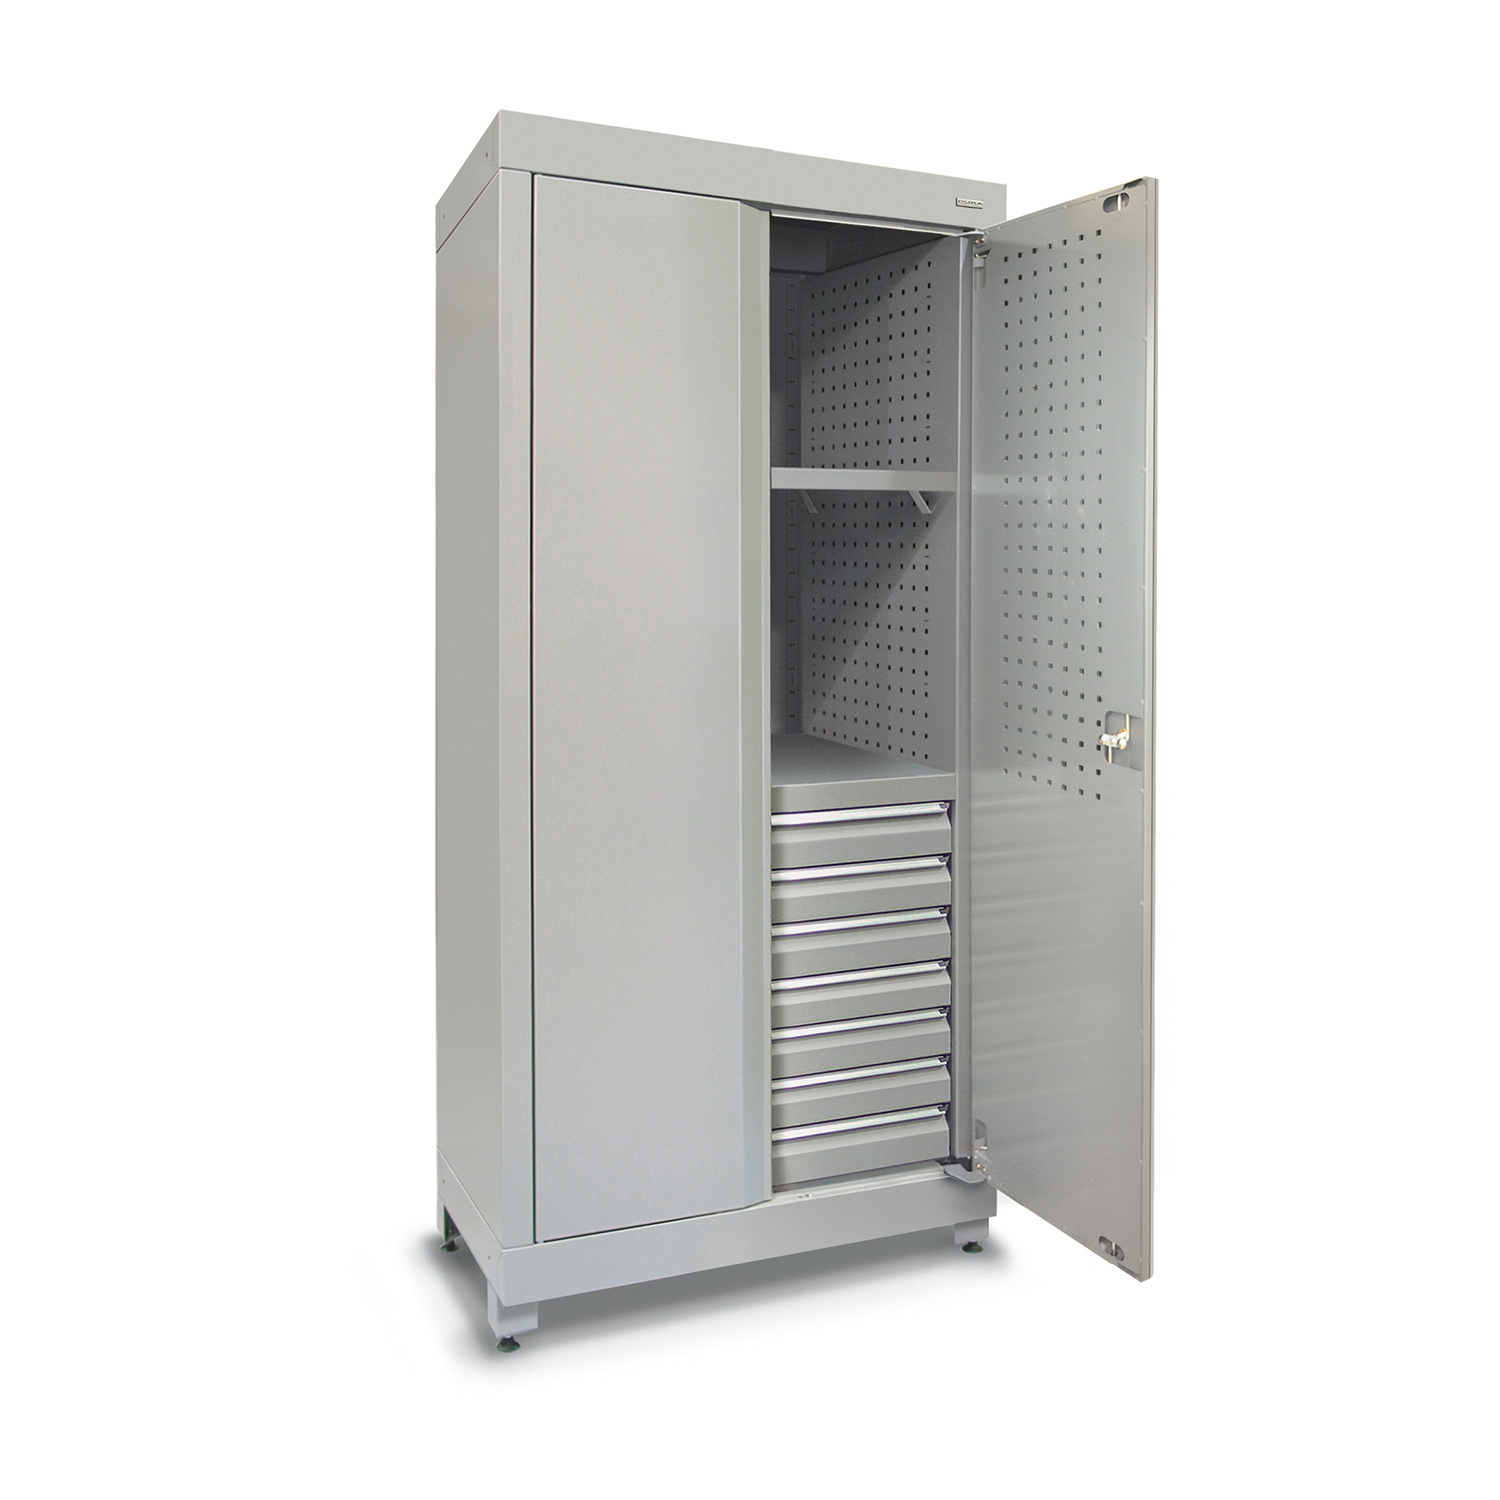 900mm Heavy-duty shelving unit with 7 drawers